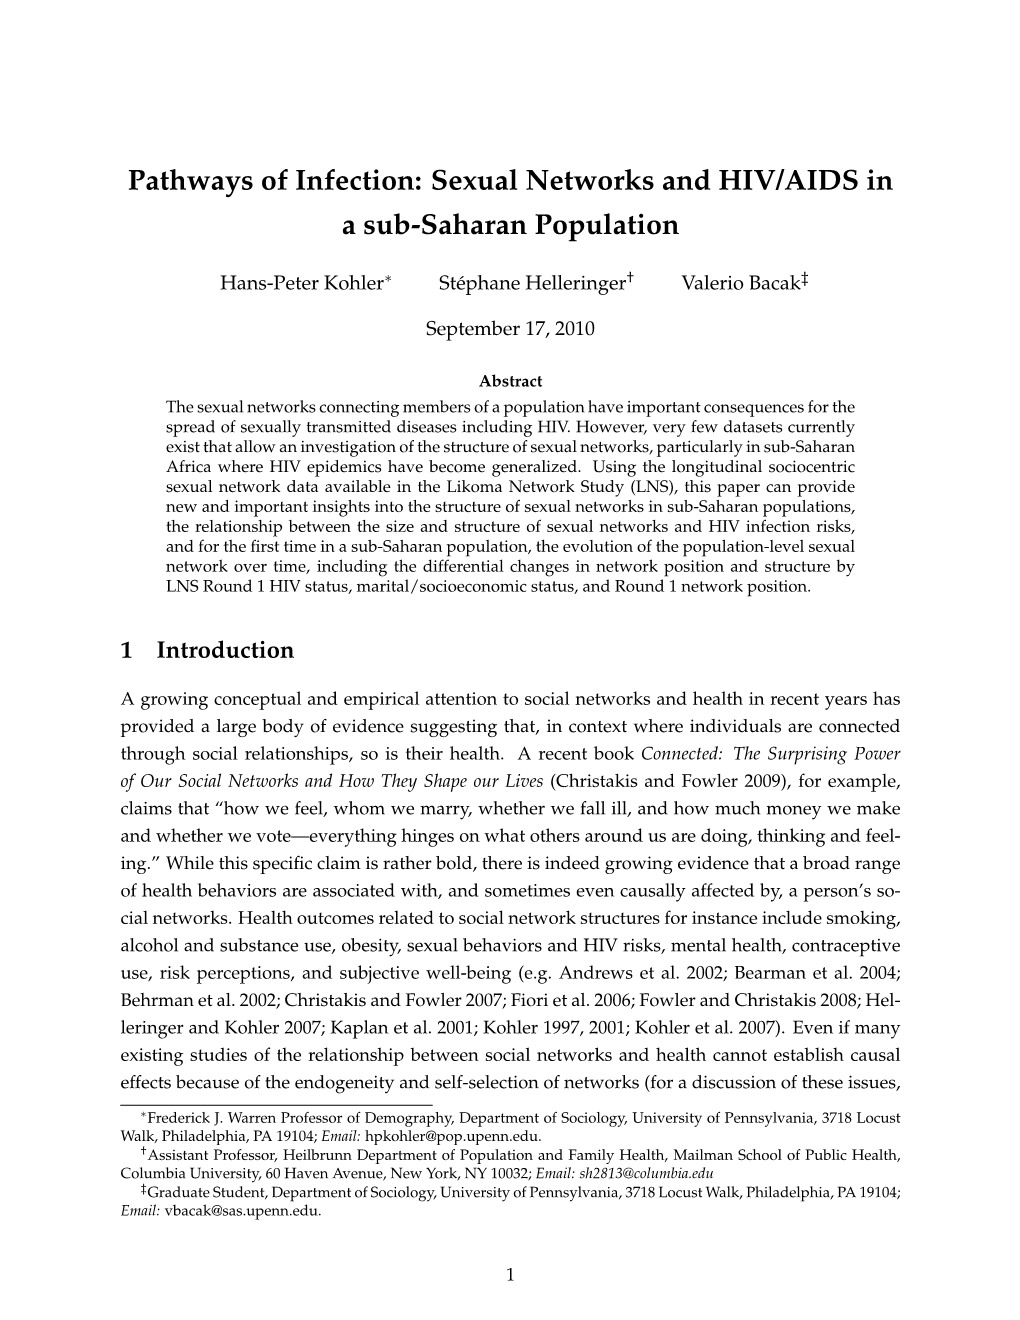 Sexual Networks and HIV/AIDS in a Sub-Saharan Population